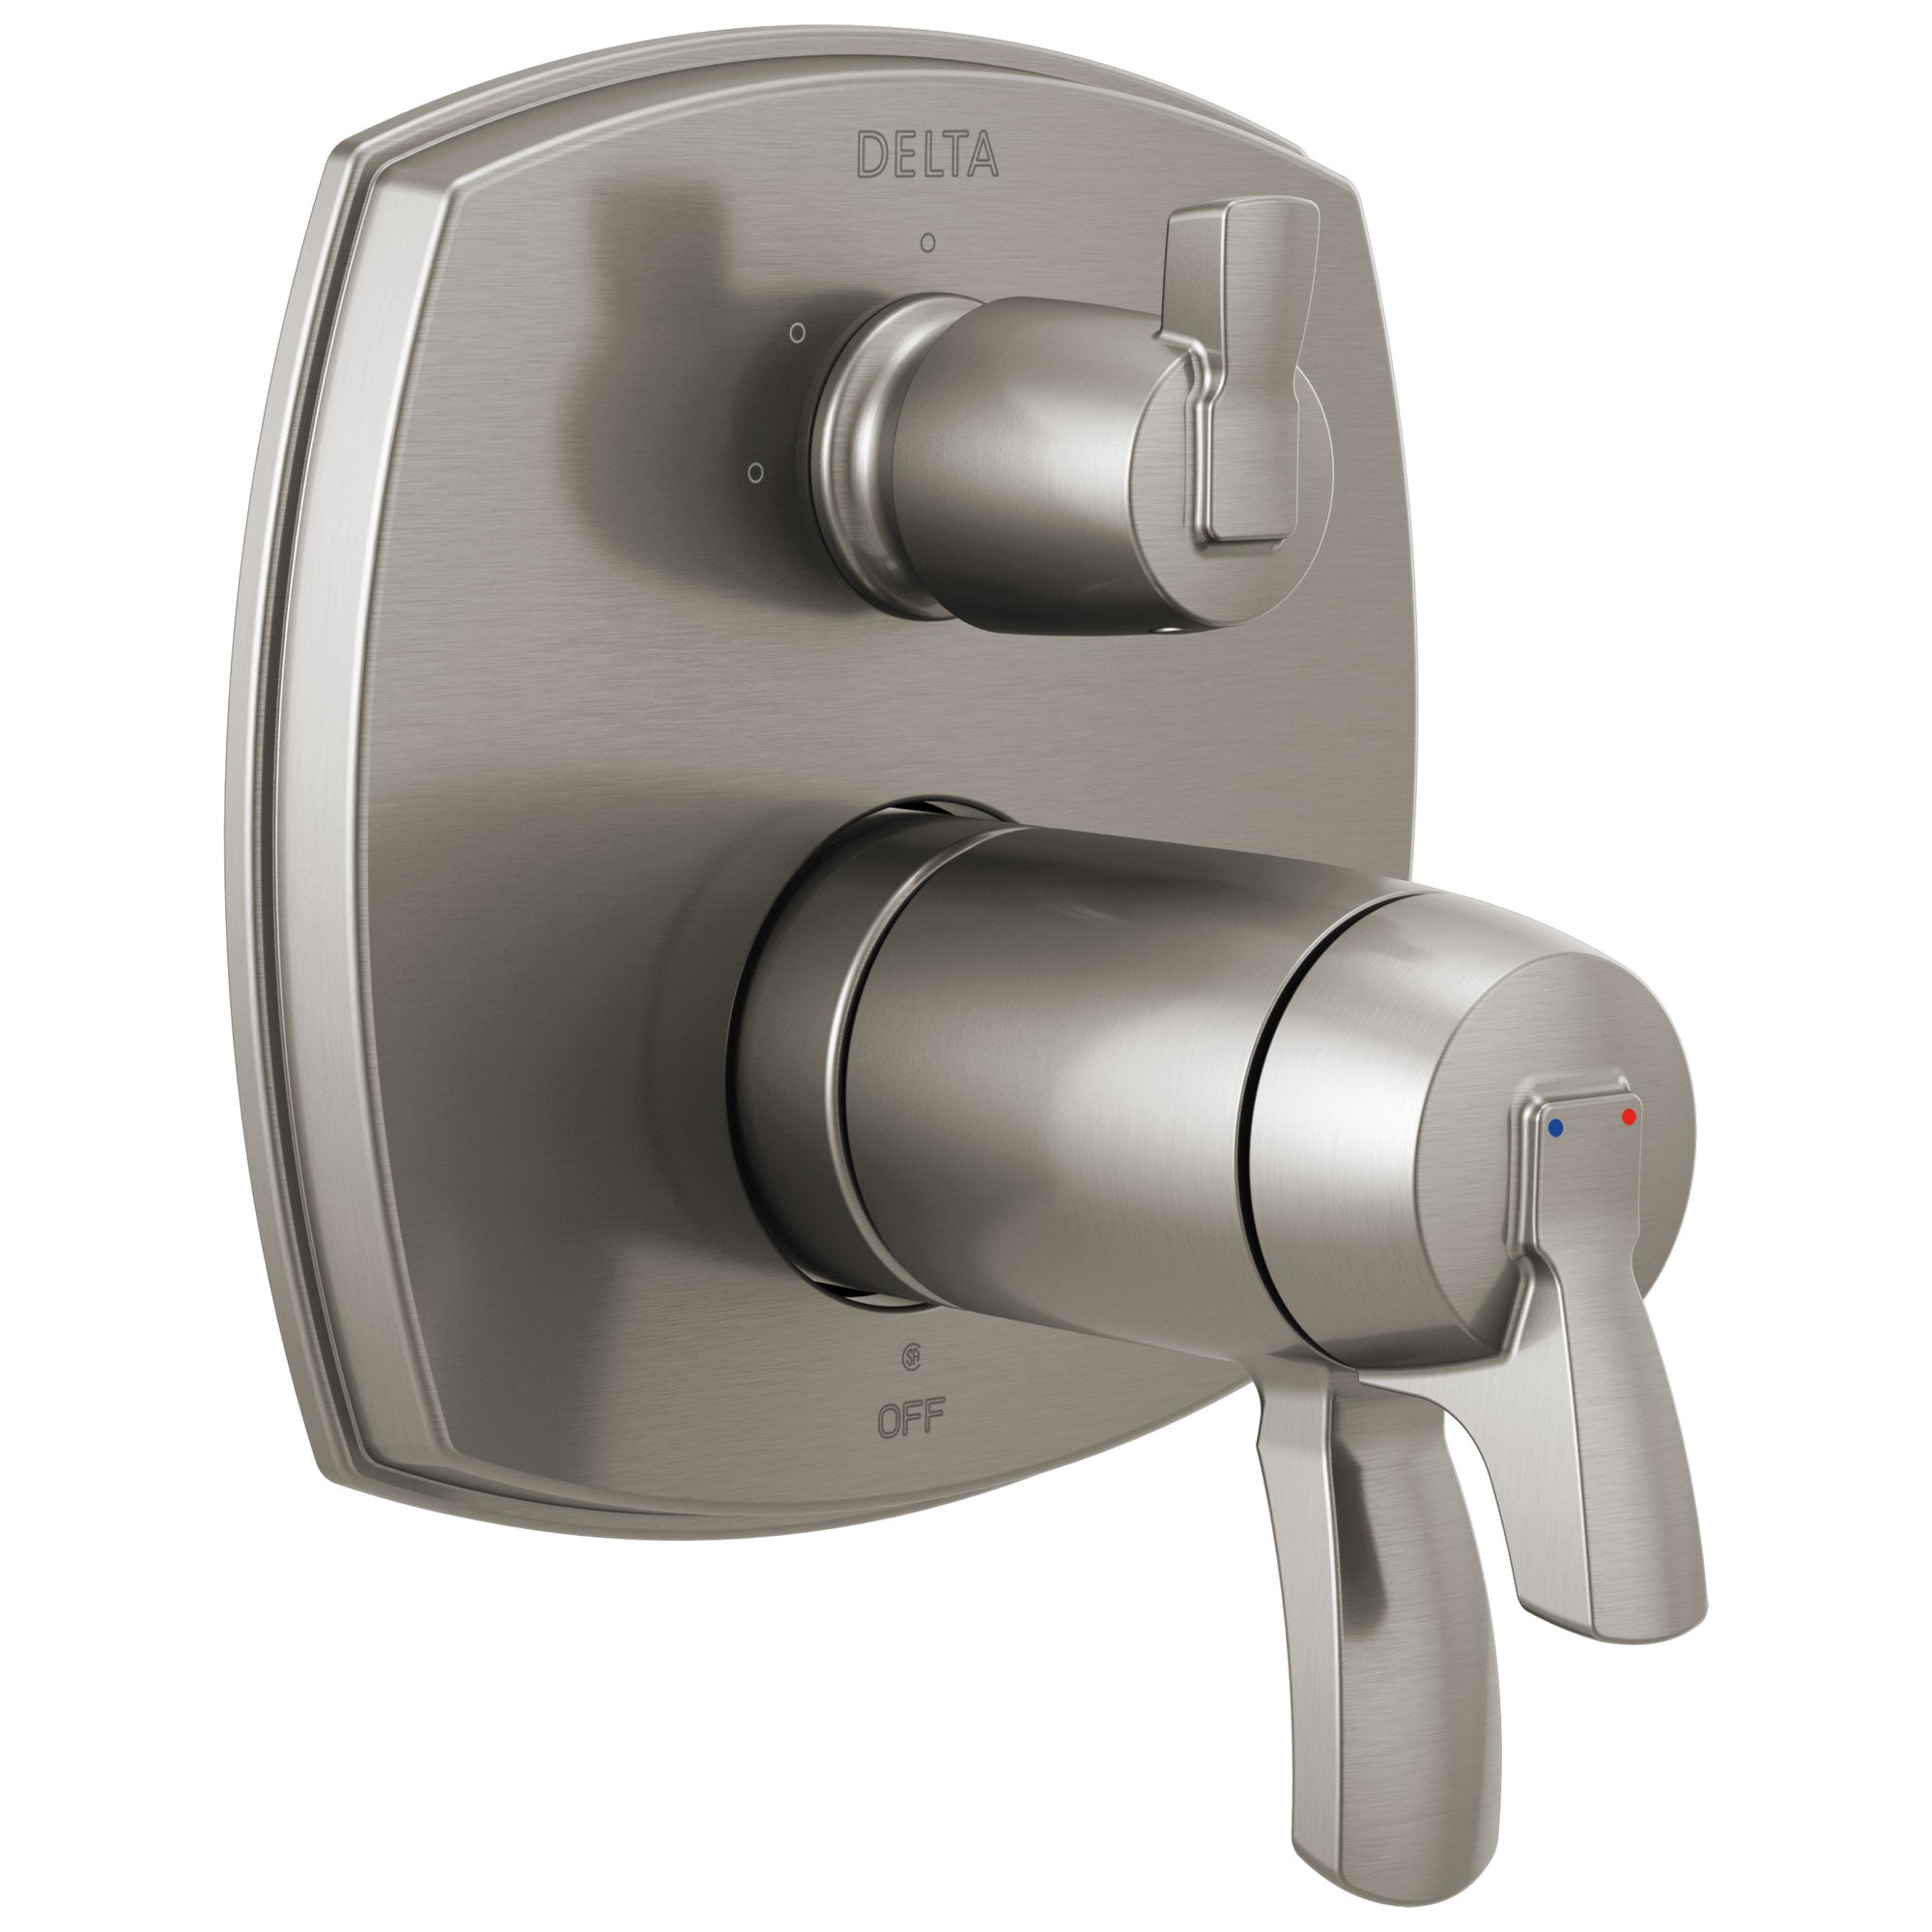 Delta Stryke Stainless Steel Finish 3-setting Integrated Lever Handle Diverter Thermostatic Shower System Control Includes Valve and Handles D3094V